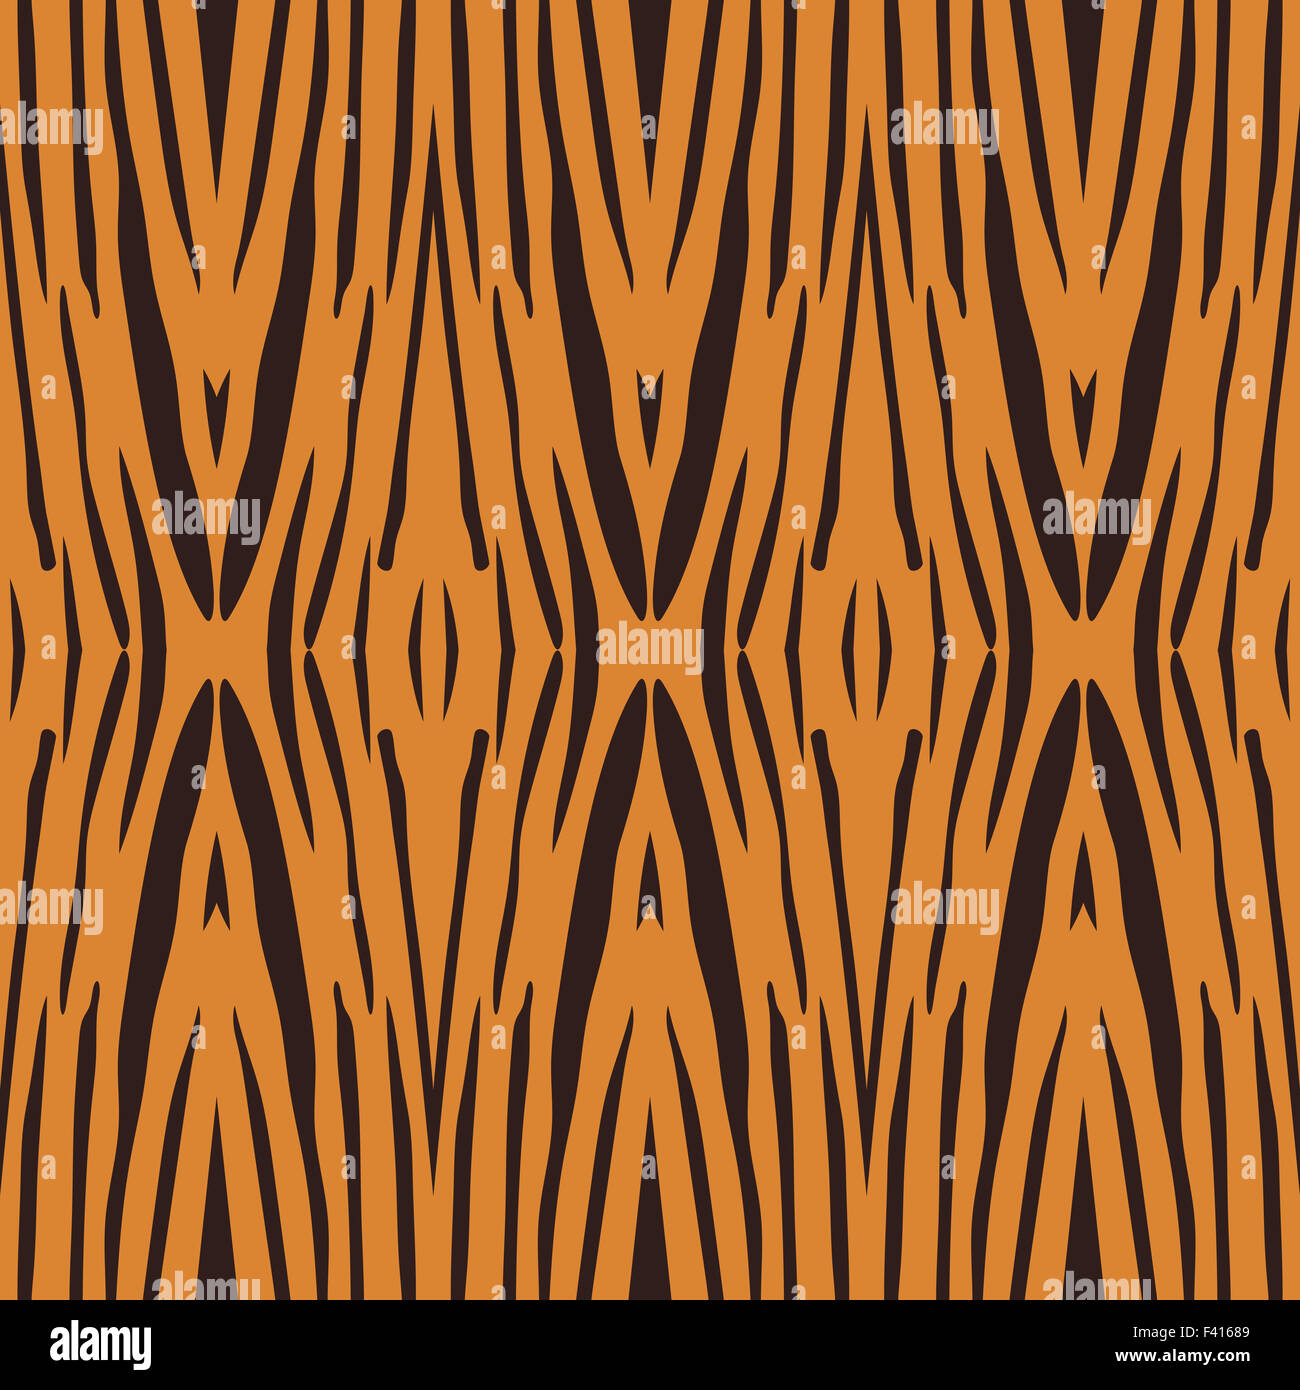 Vector illustration of tiger stripe pattern. Beautiful pattern made by the Mother Nature. Stock Photo